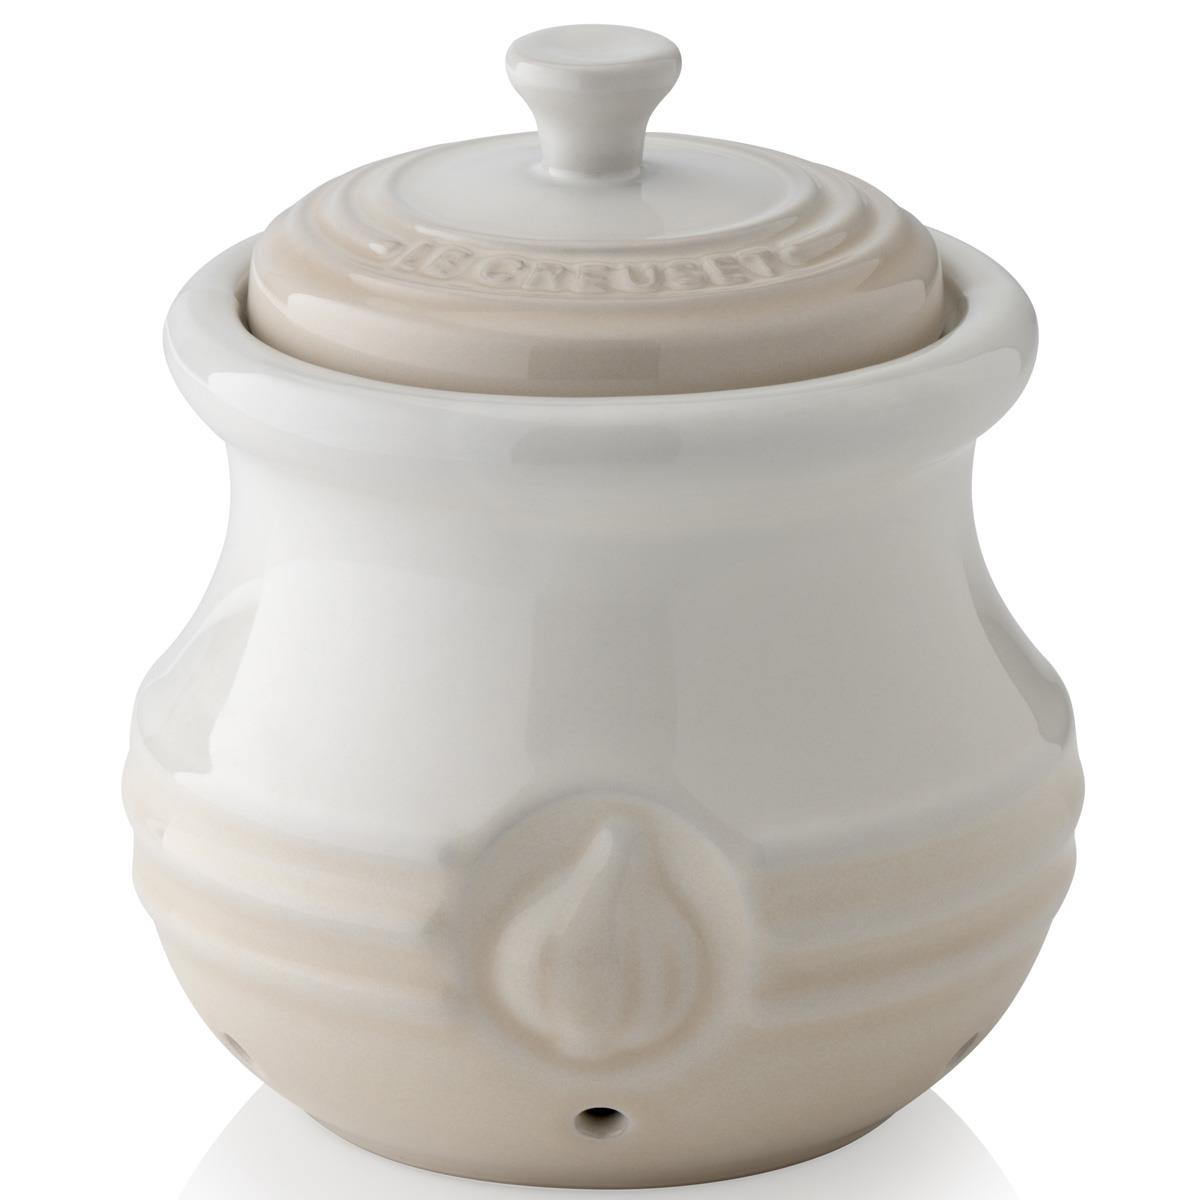 What features does the Le Creuset garlic keeper have?